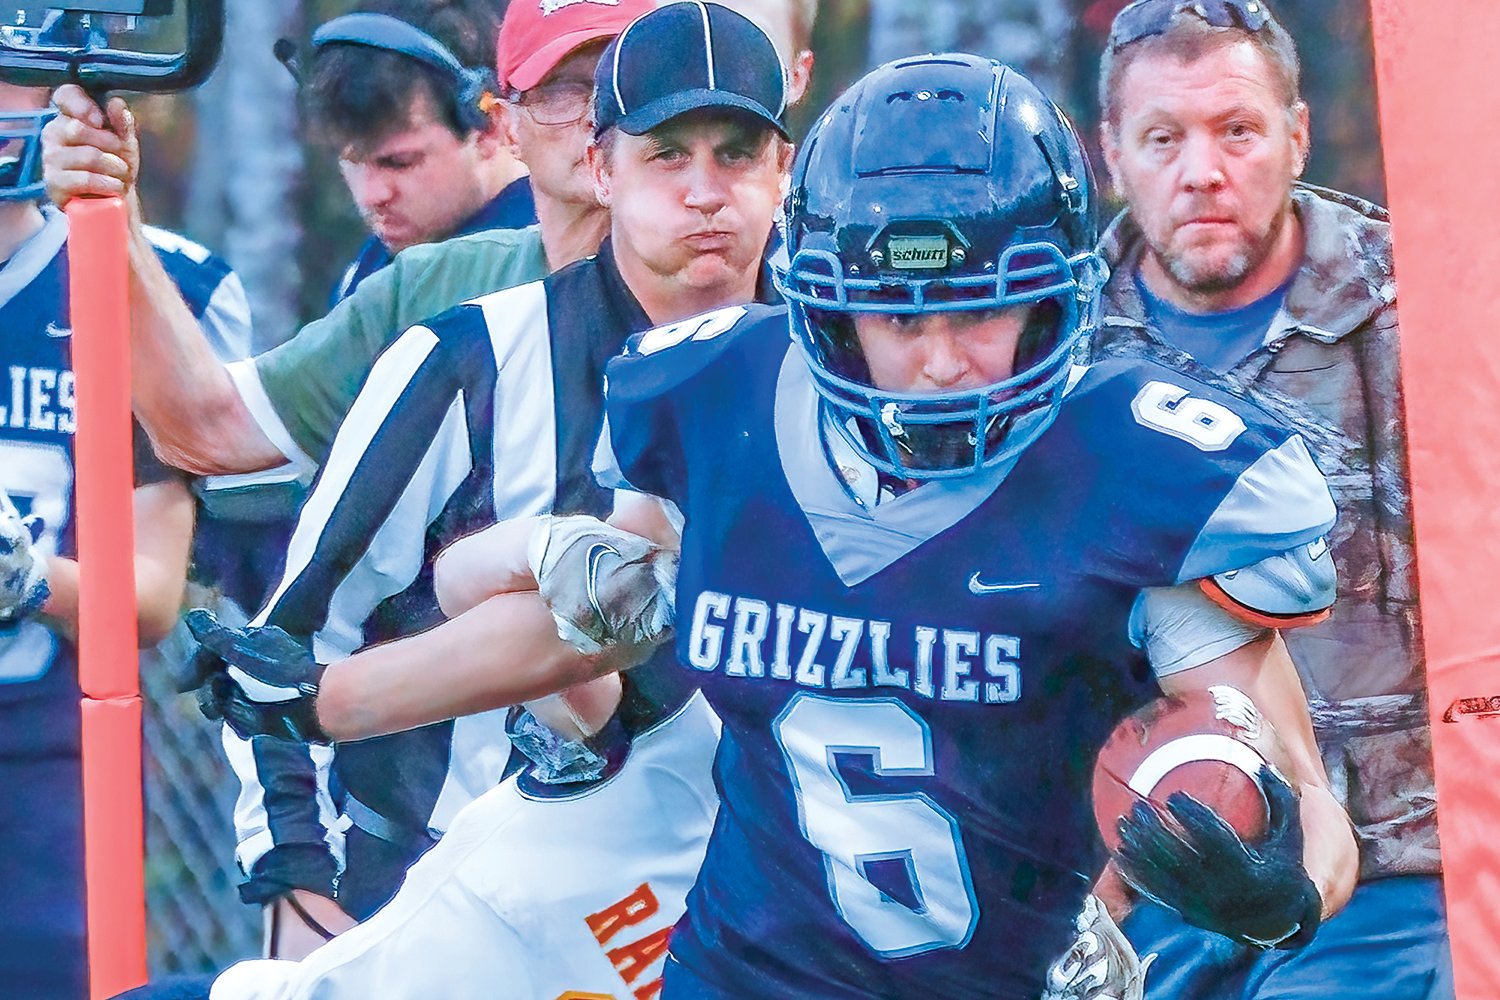 Jared Chiabotti sheds a Raiders tackler before streaking down the 
sideline for the Grizzlies’ first touchdown.